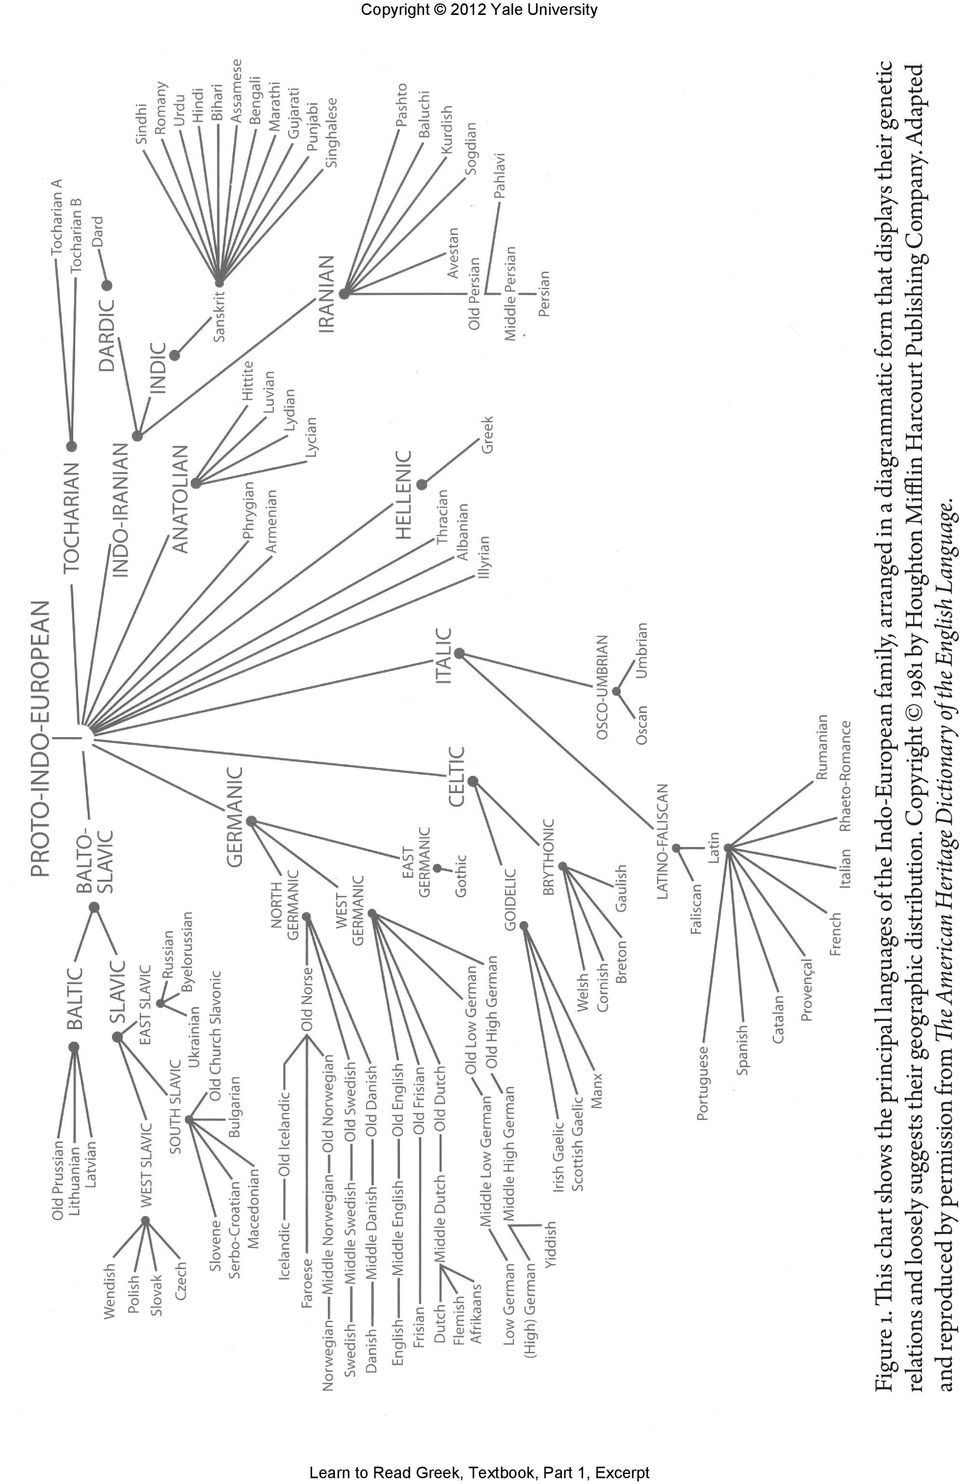 diagrammatic form that displays their genetic relations and loosely suggests their